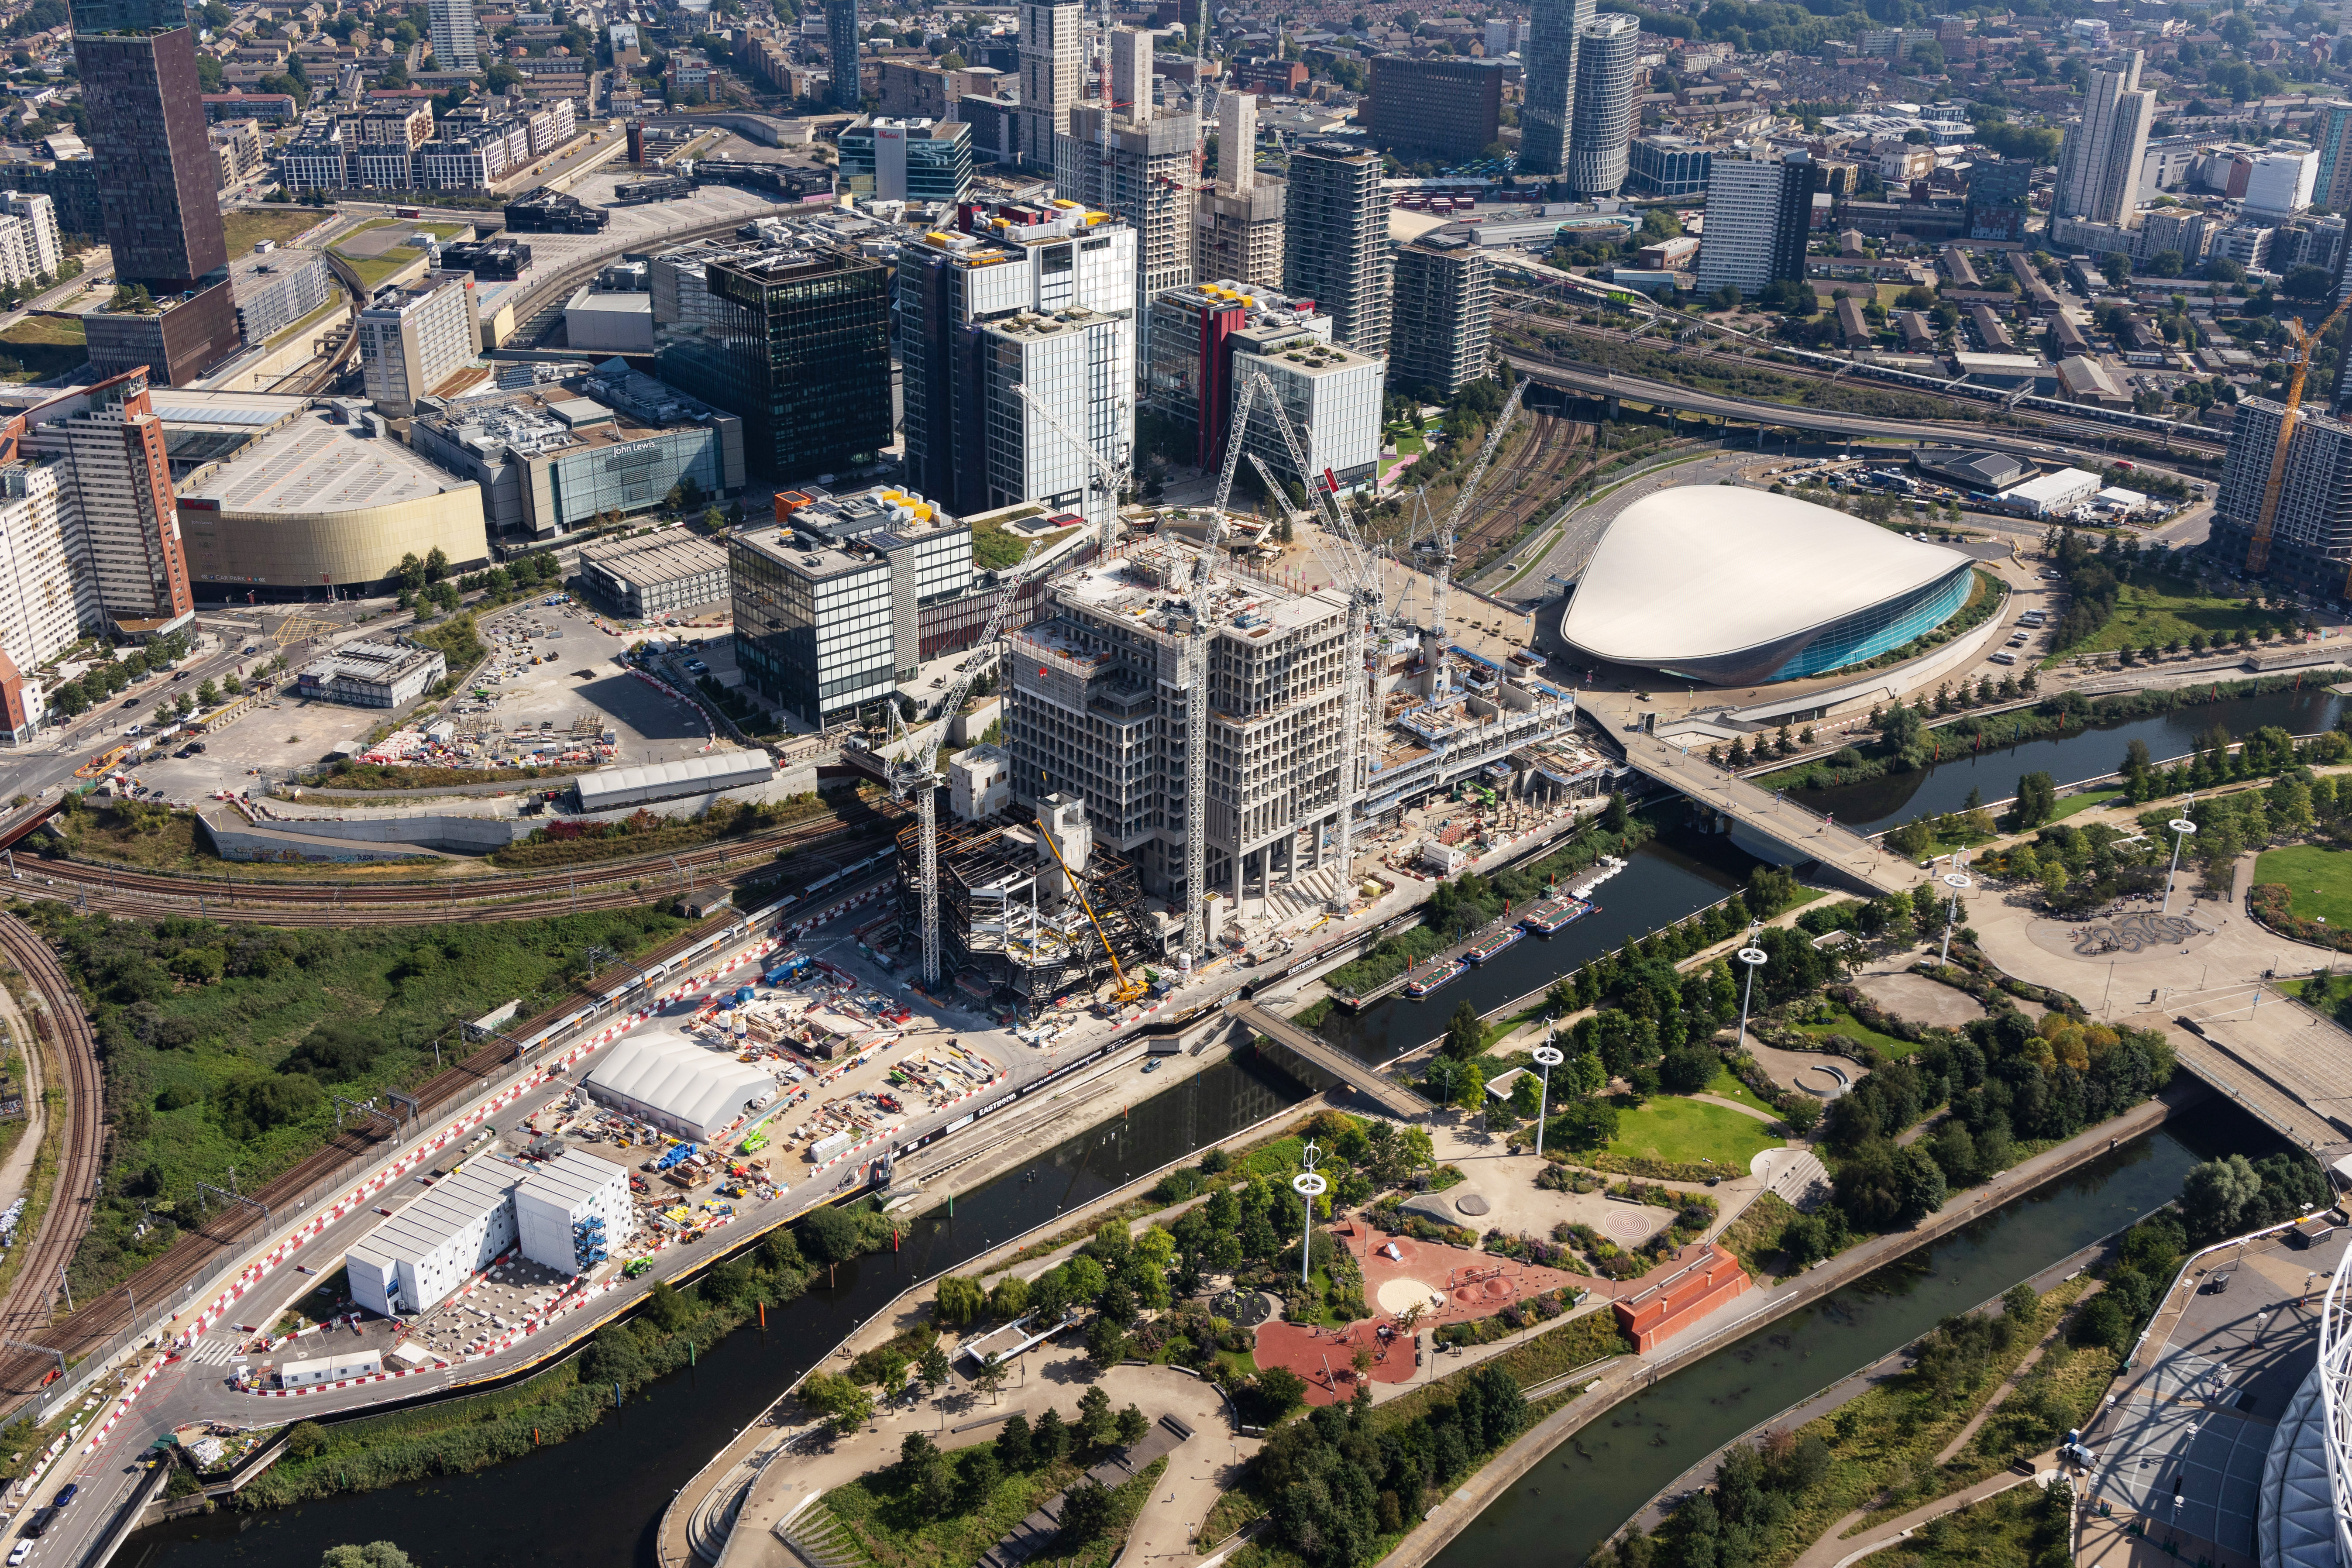 Close-up aerial view of East Bank, Queen Elizabeth Olympic Park, October 2021. Photography by London Legacy Development Corporation